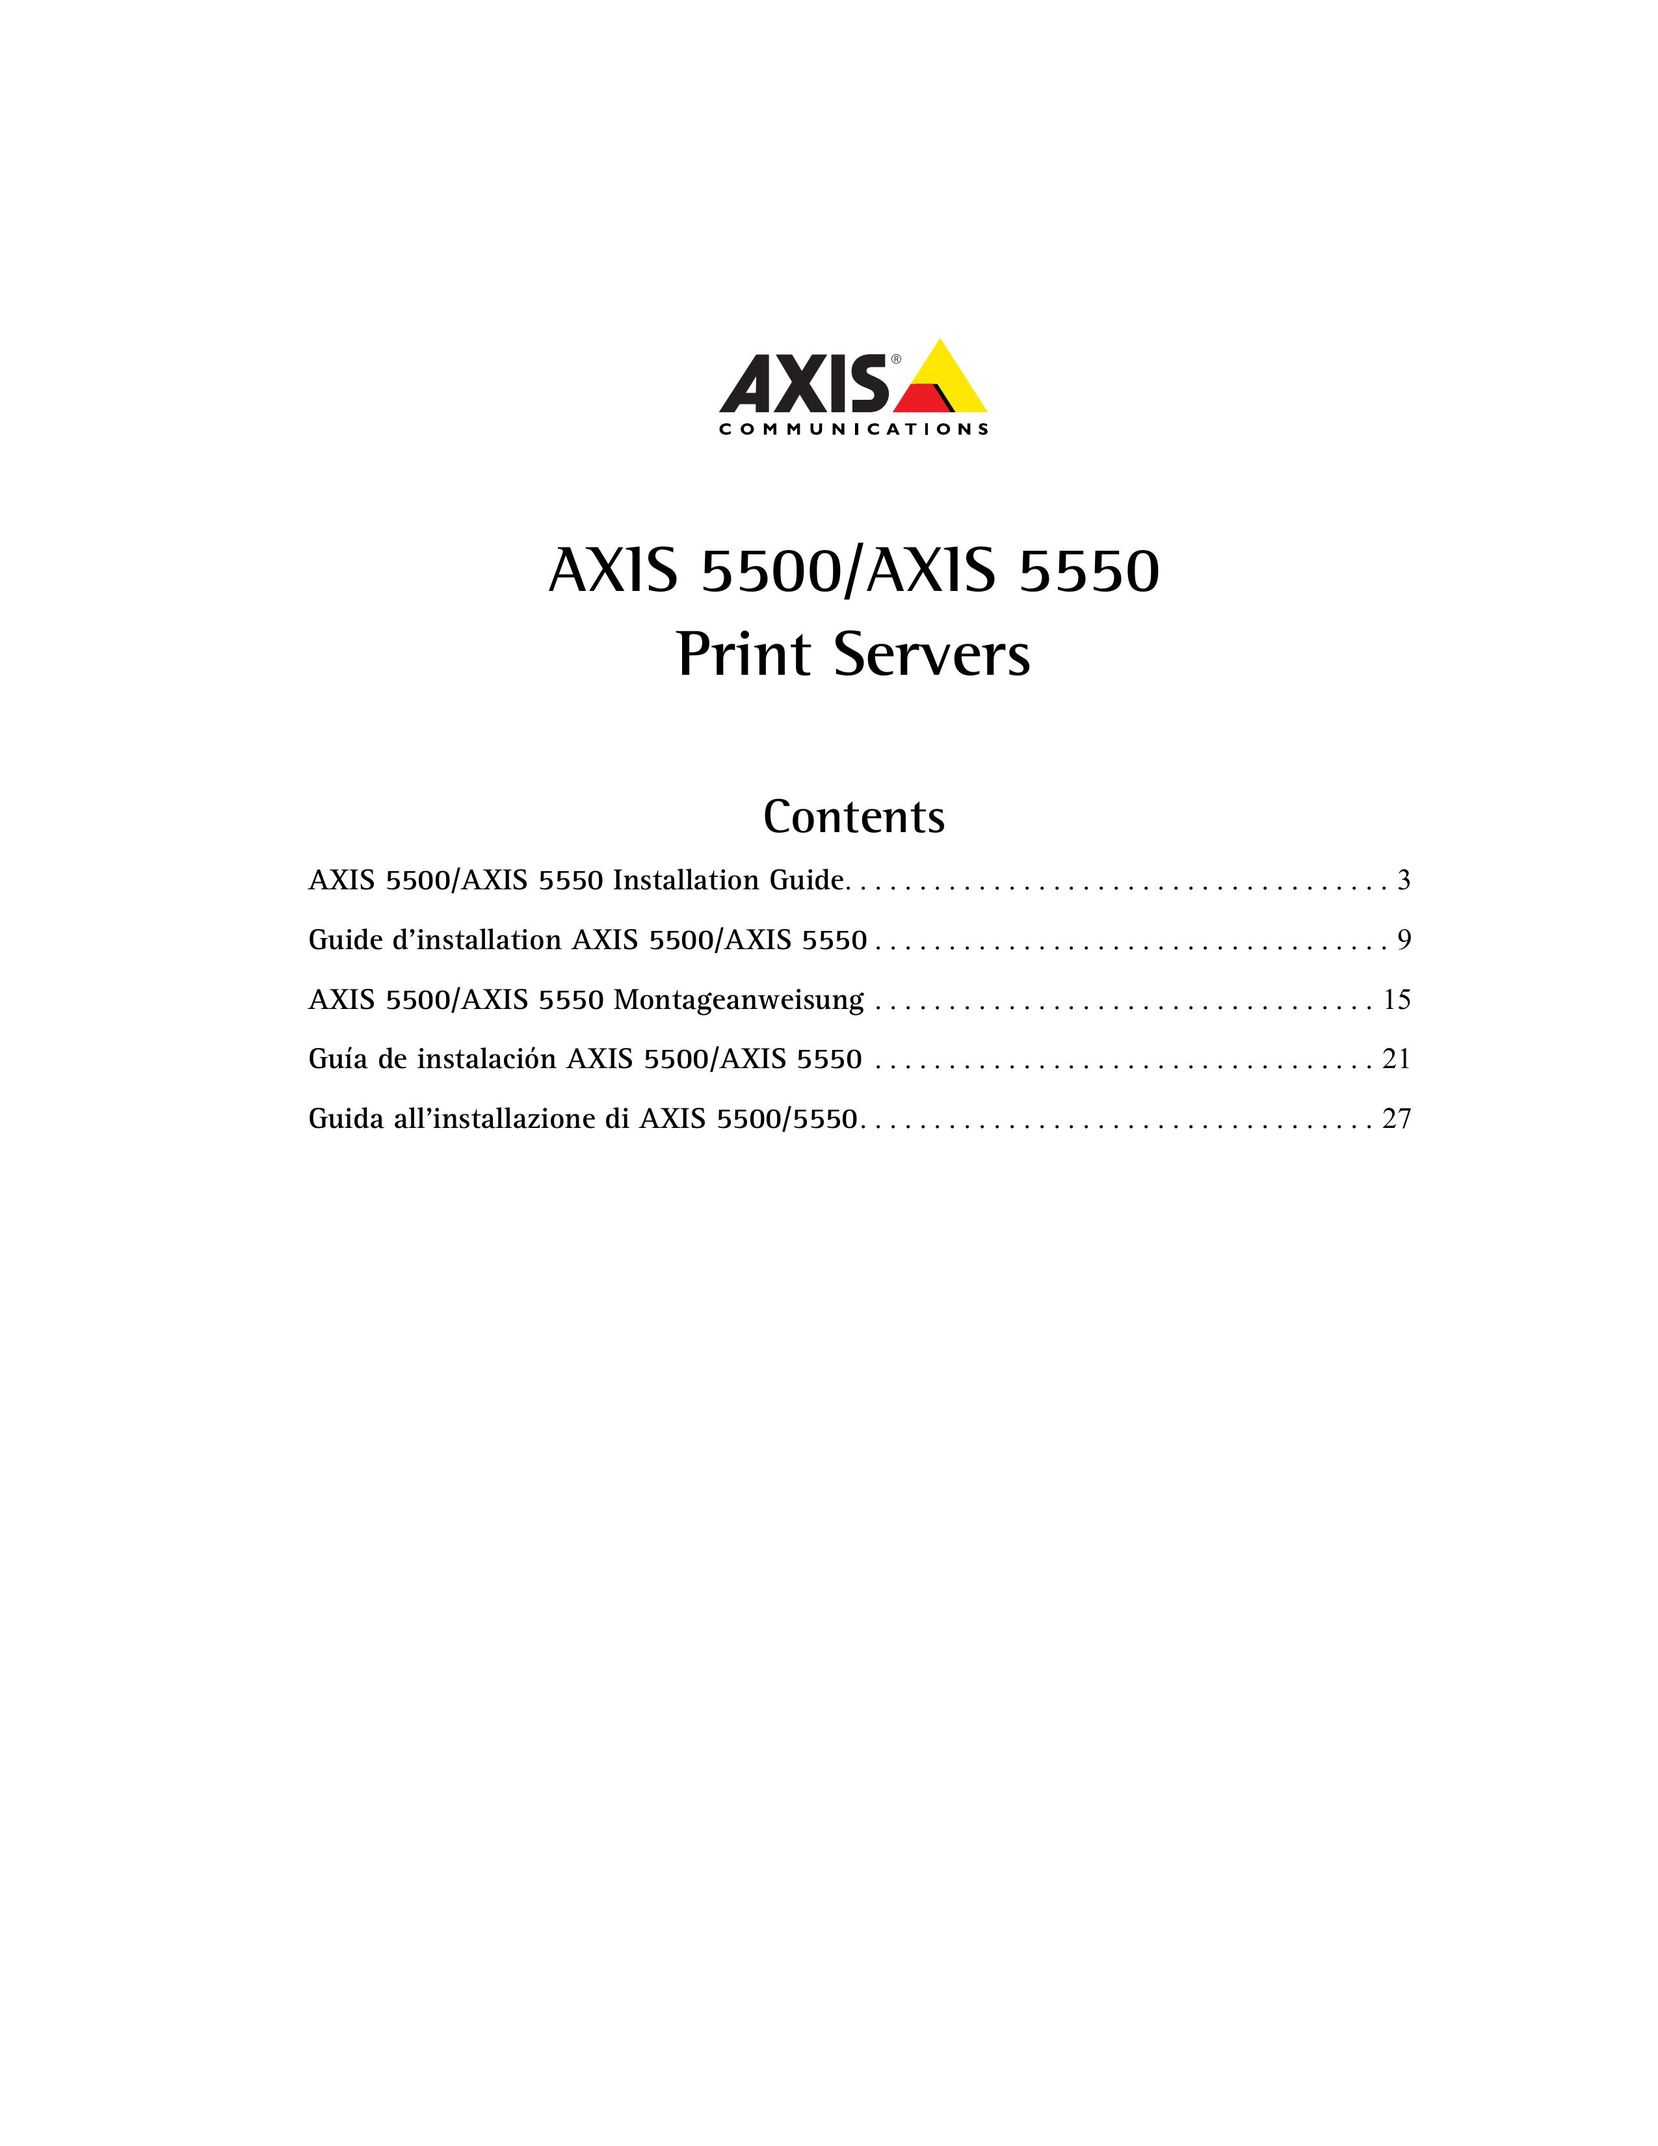 Axis Communications AXIS 5550 Printer User Manual